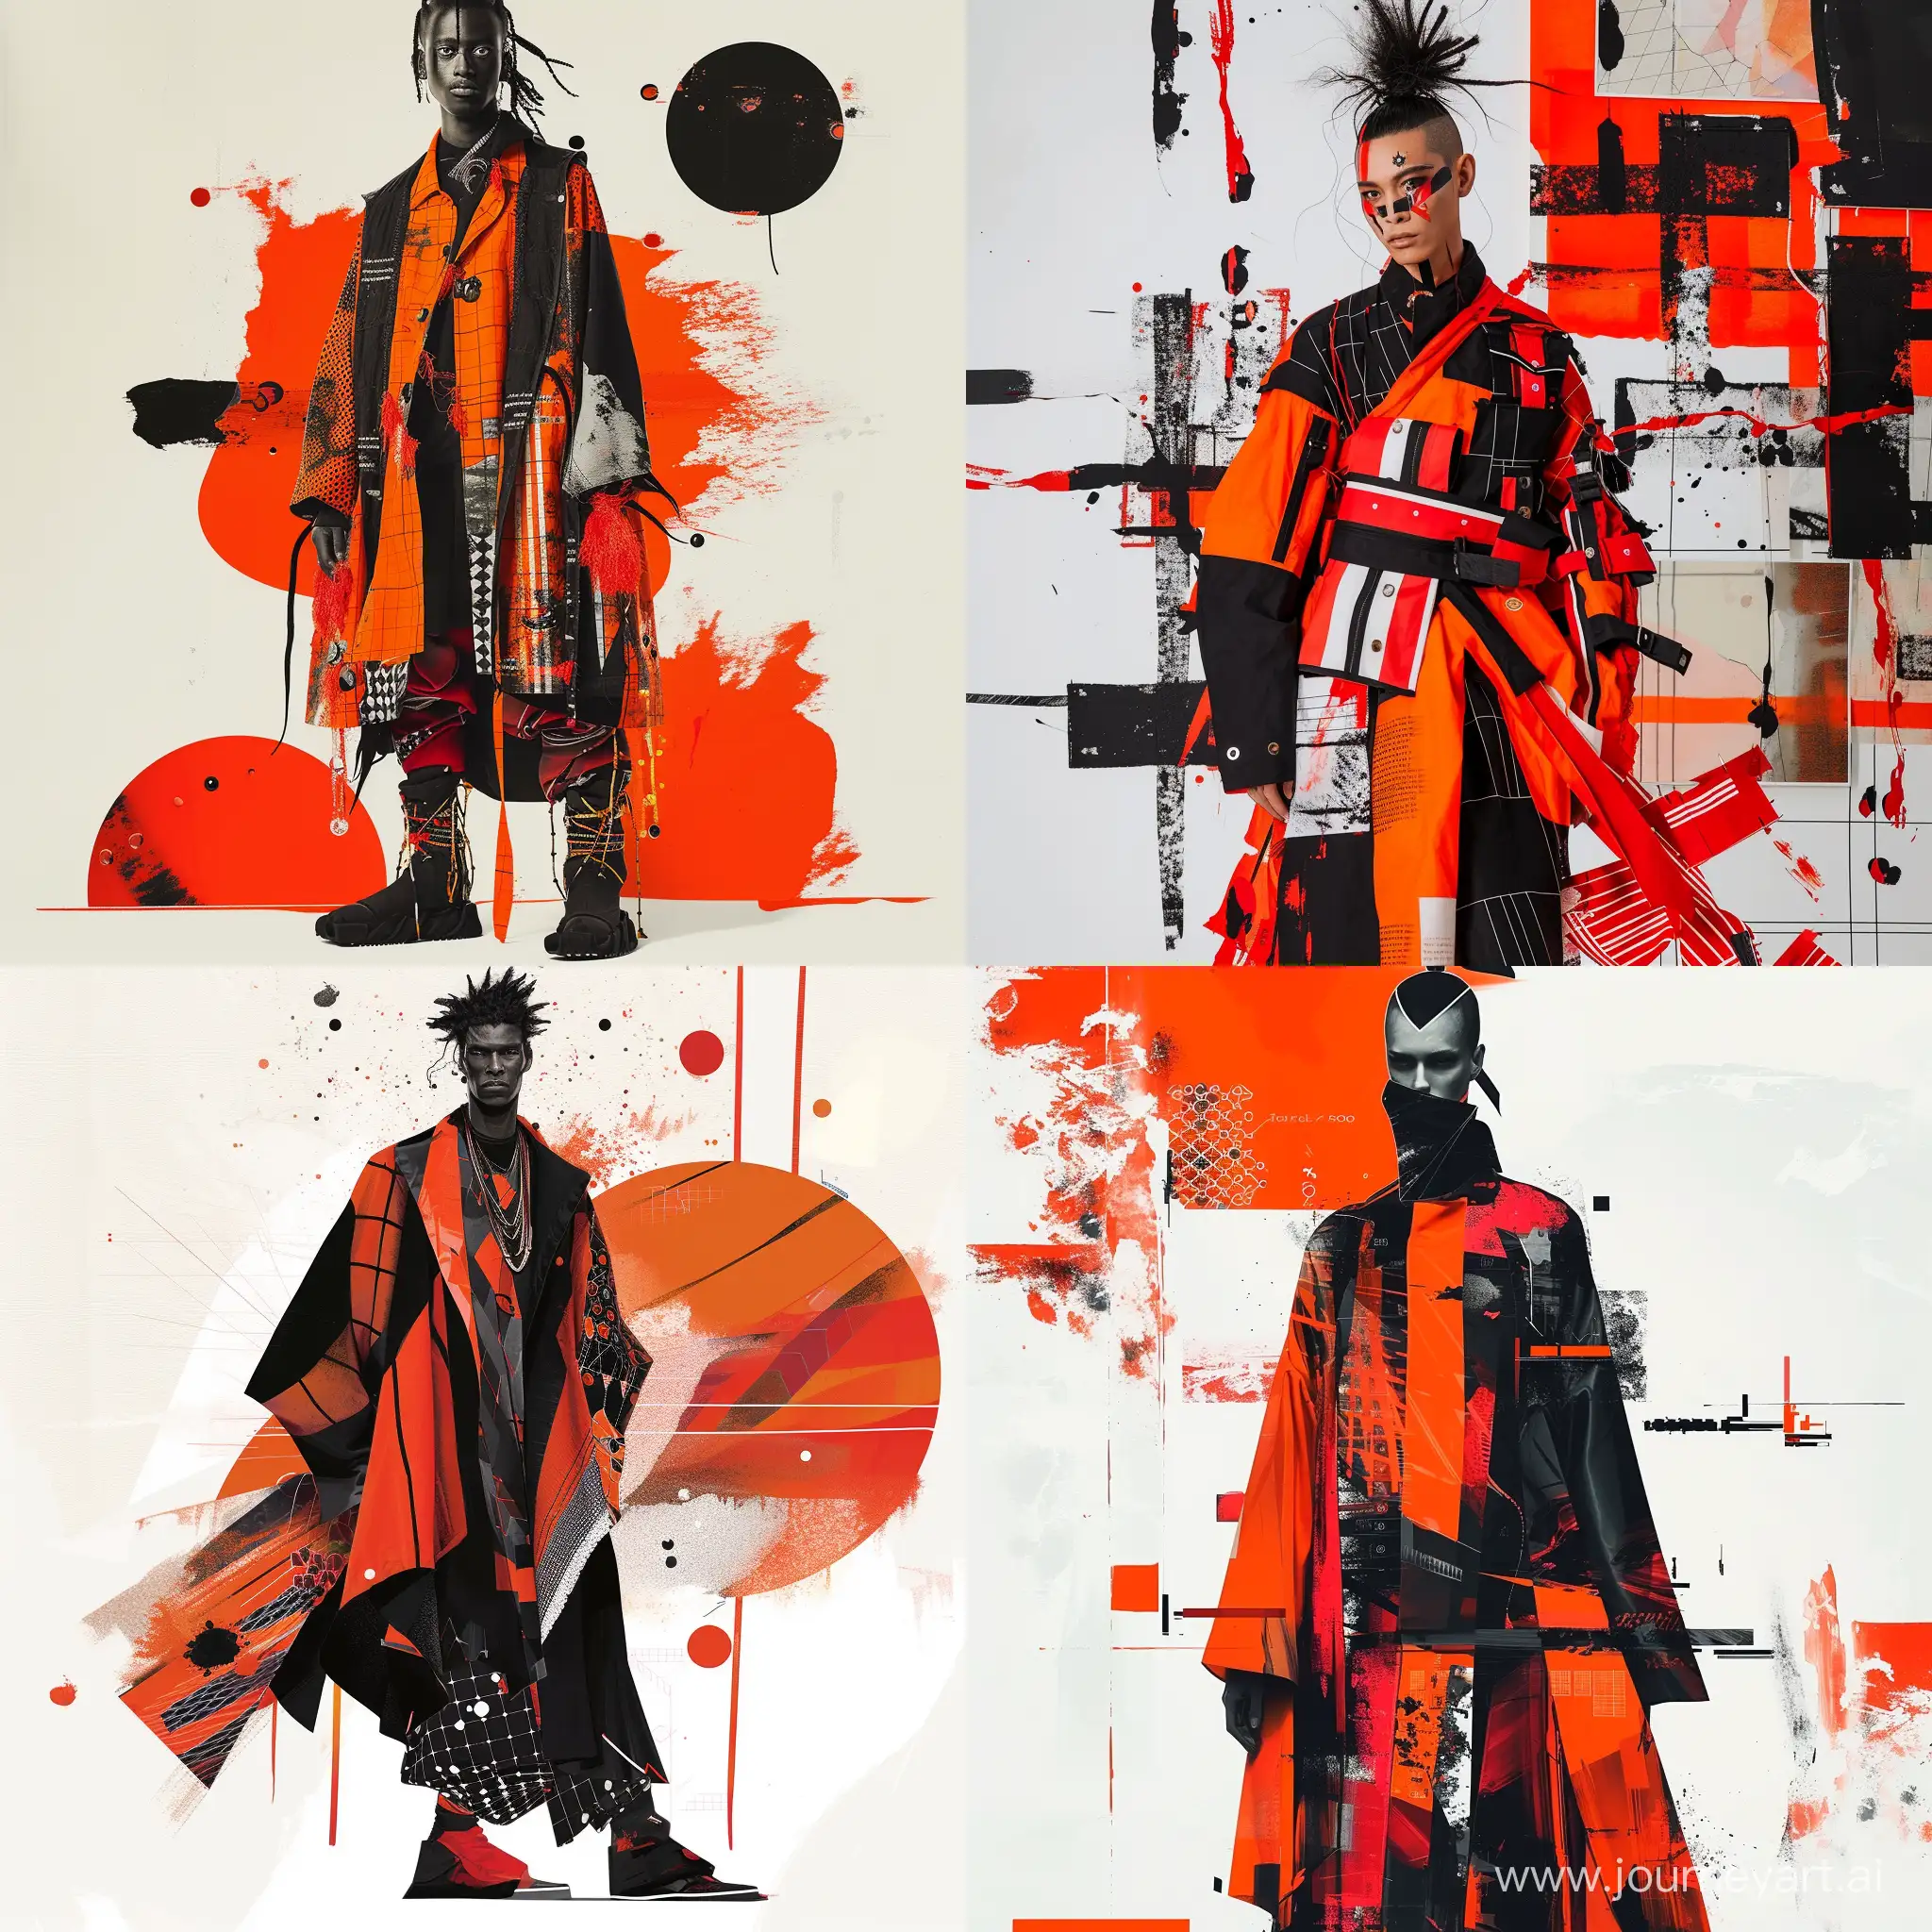 Male. Capture the essence of the fashion image that embodies the concepts of identity, chaos, purity, freedom, mathematics, and the striking color palette of orange, black, and red. Imagine the journey of the wearer as they confidently navigate through a world that celebrates diversity and individuality. Dive into the details of their attire, the fusion of global influences, and the mathematical precision behind their fashion choices. Show us how they express their unique identity fearlessly and harmoniously through their bold and unconventional style.